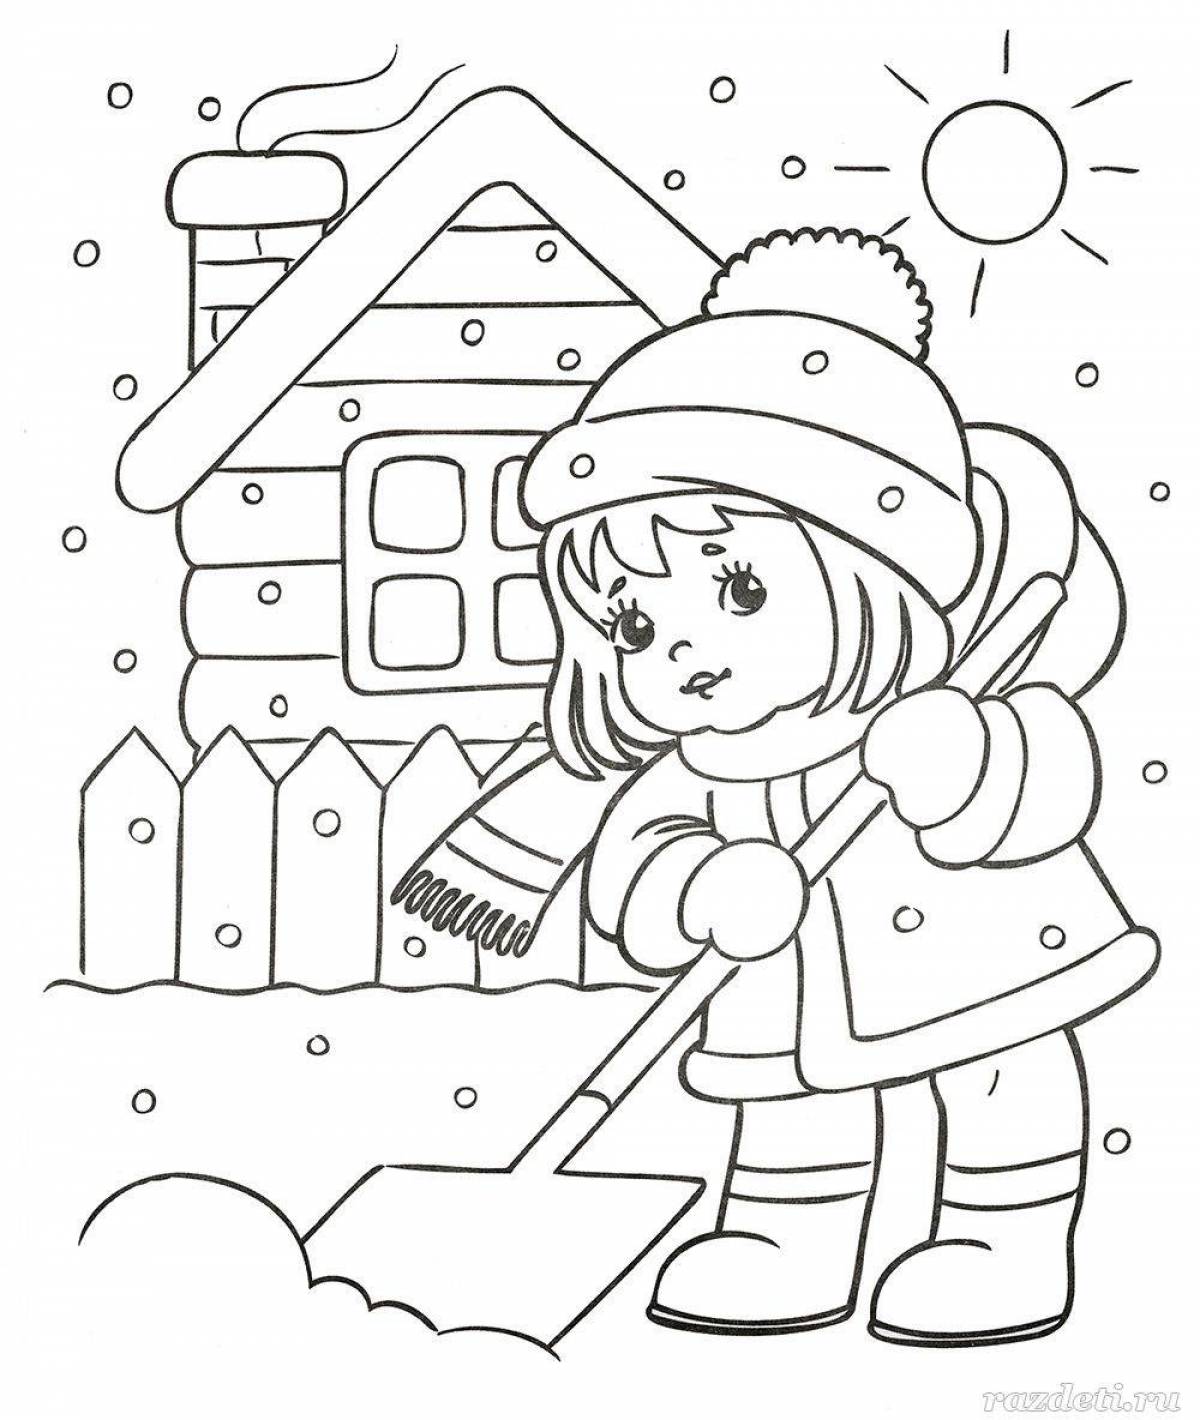 Cute winter coloring book for kids